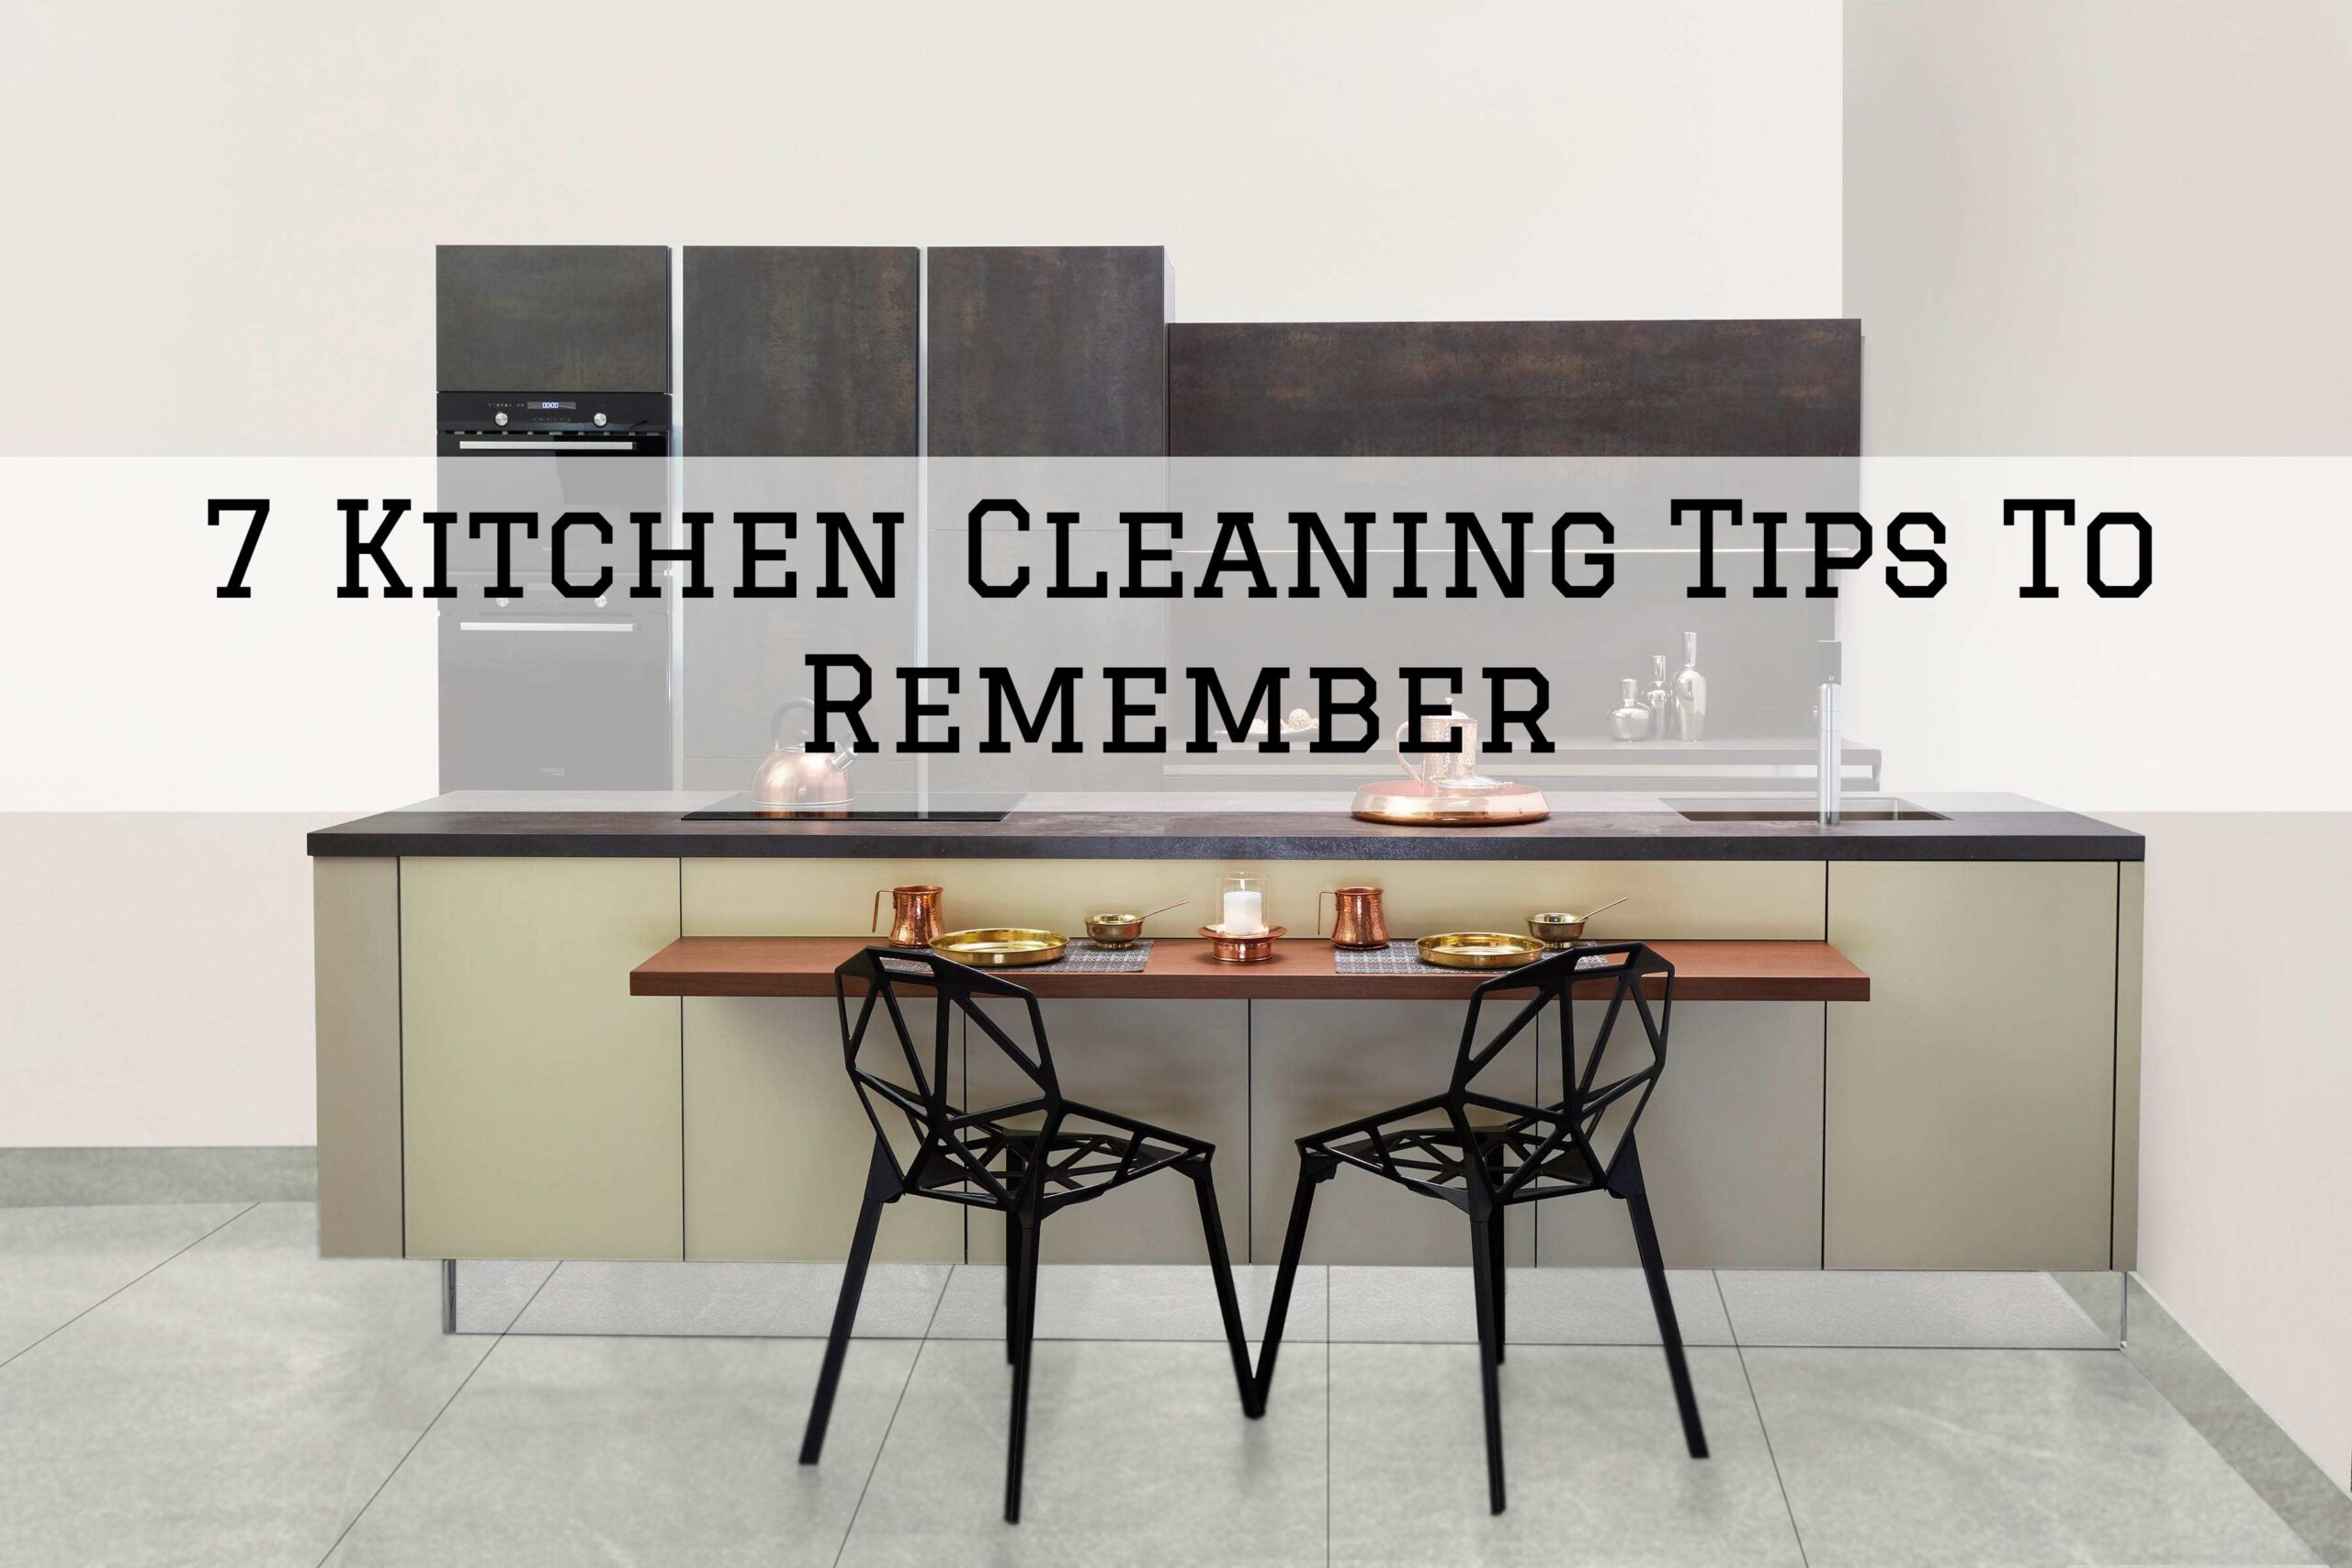 2021-11-20 Image Painting McLean VA Kitchen Cleaning Tips